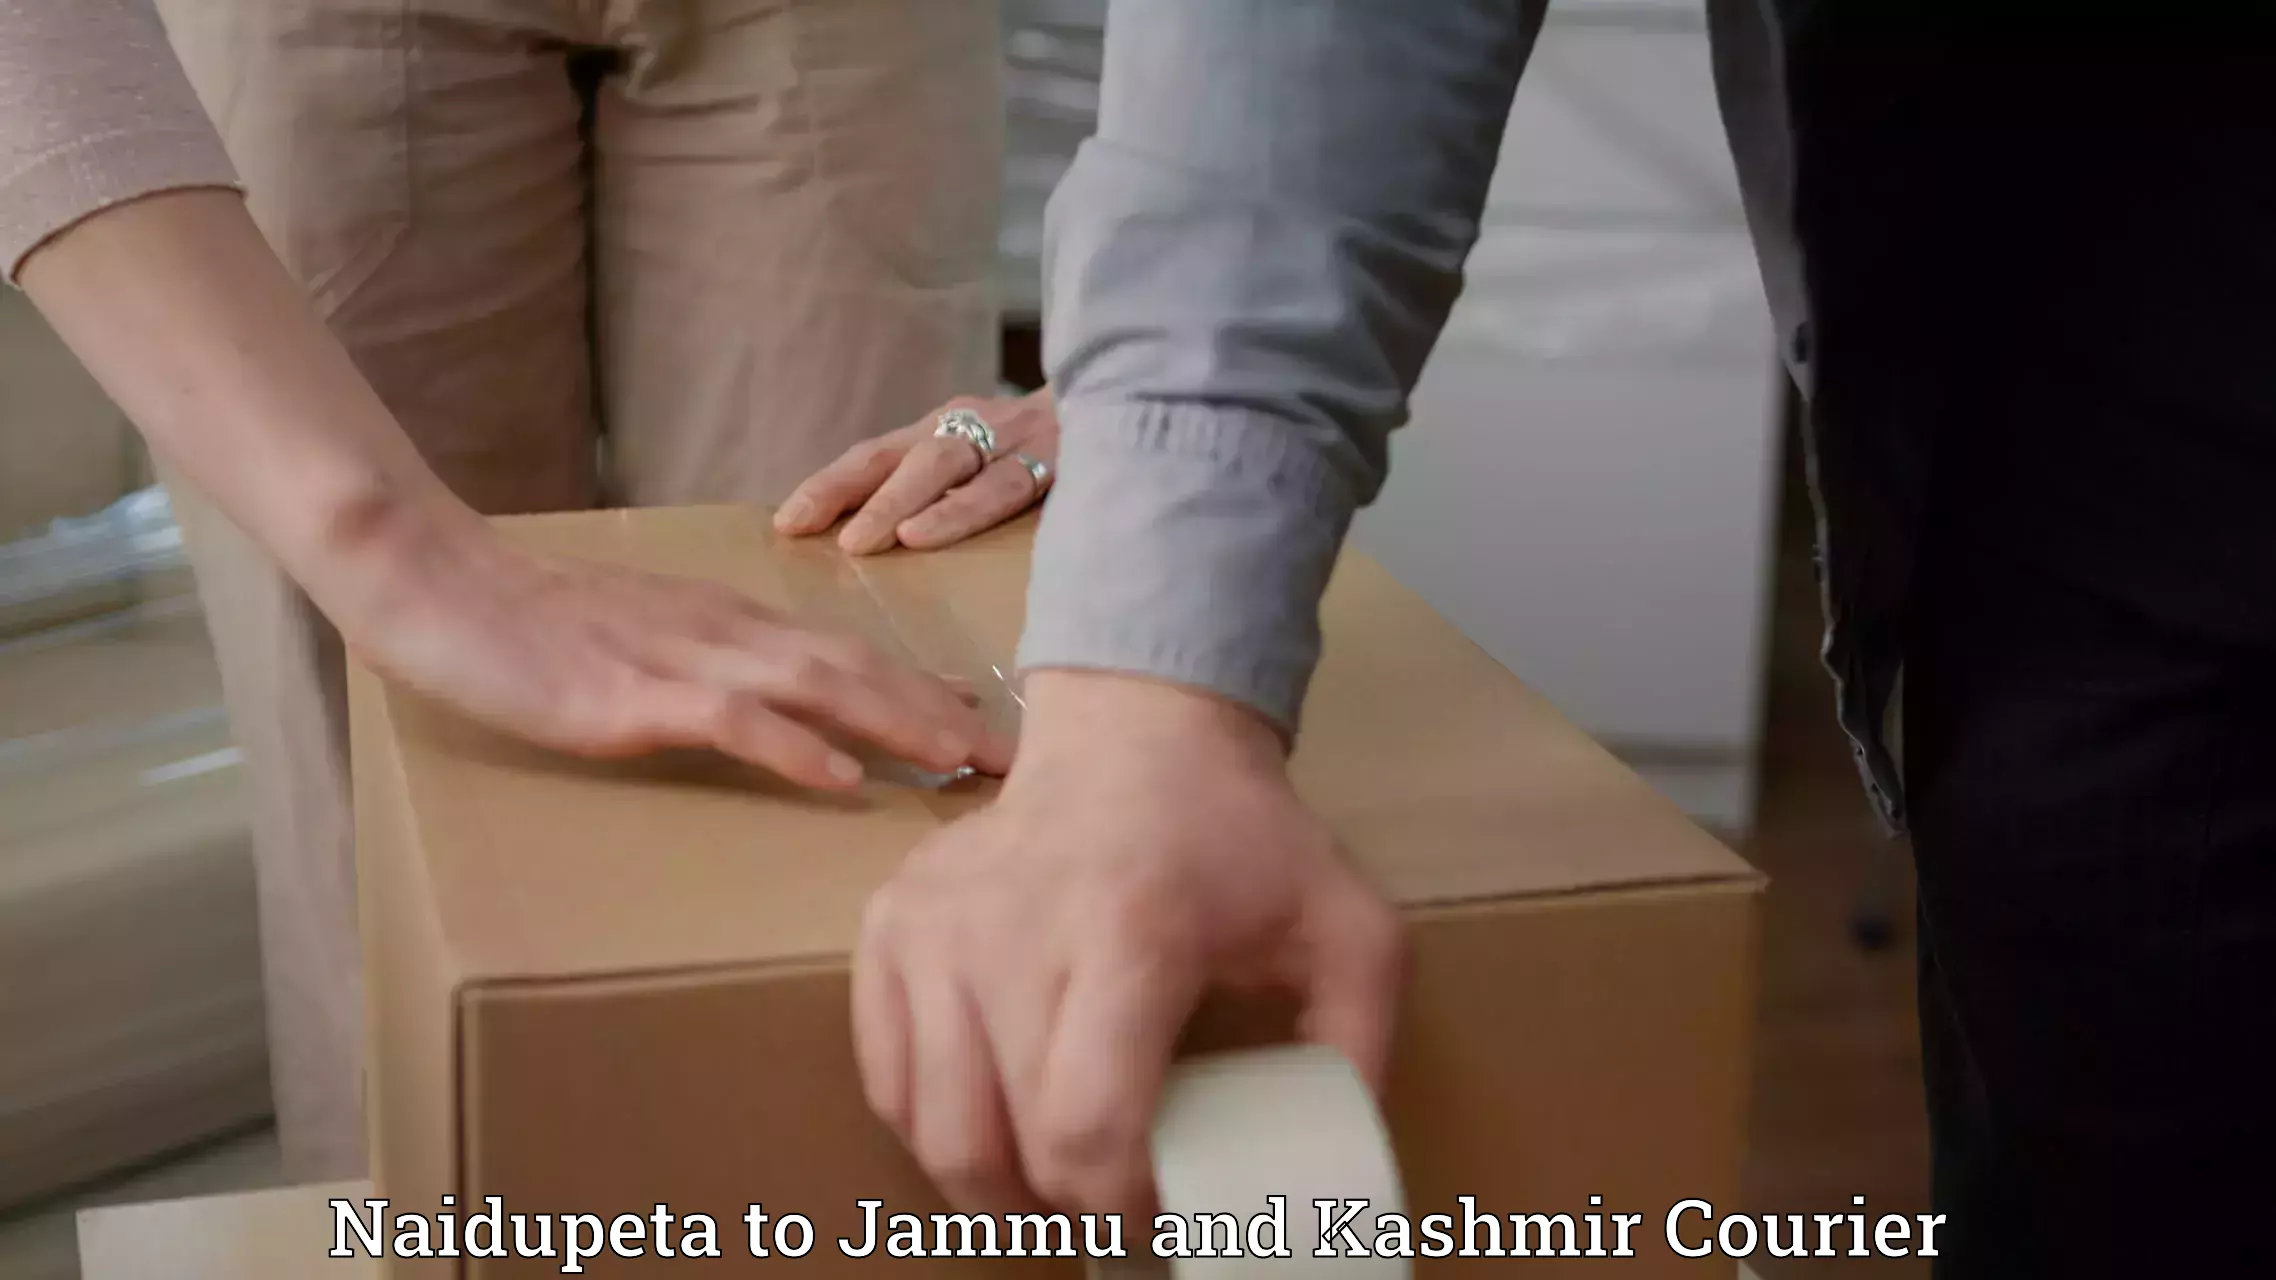 Easy access courier services Naidupeta to Baramulla